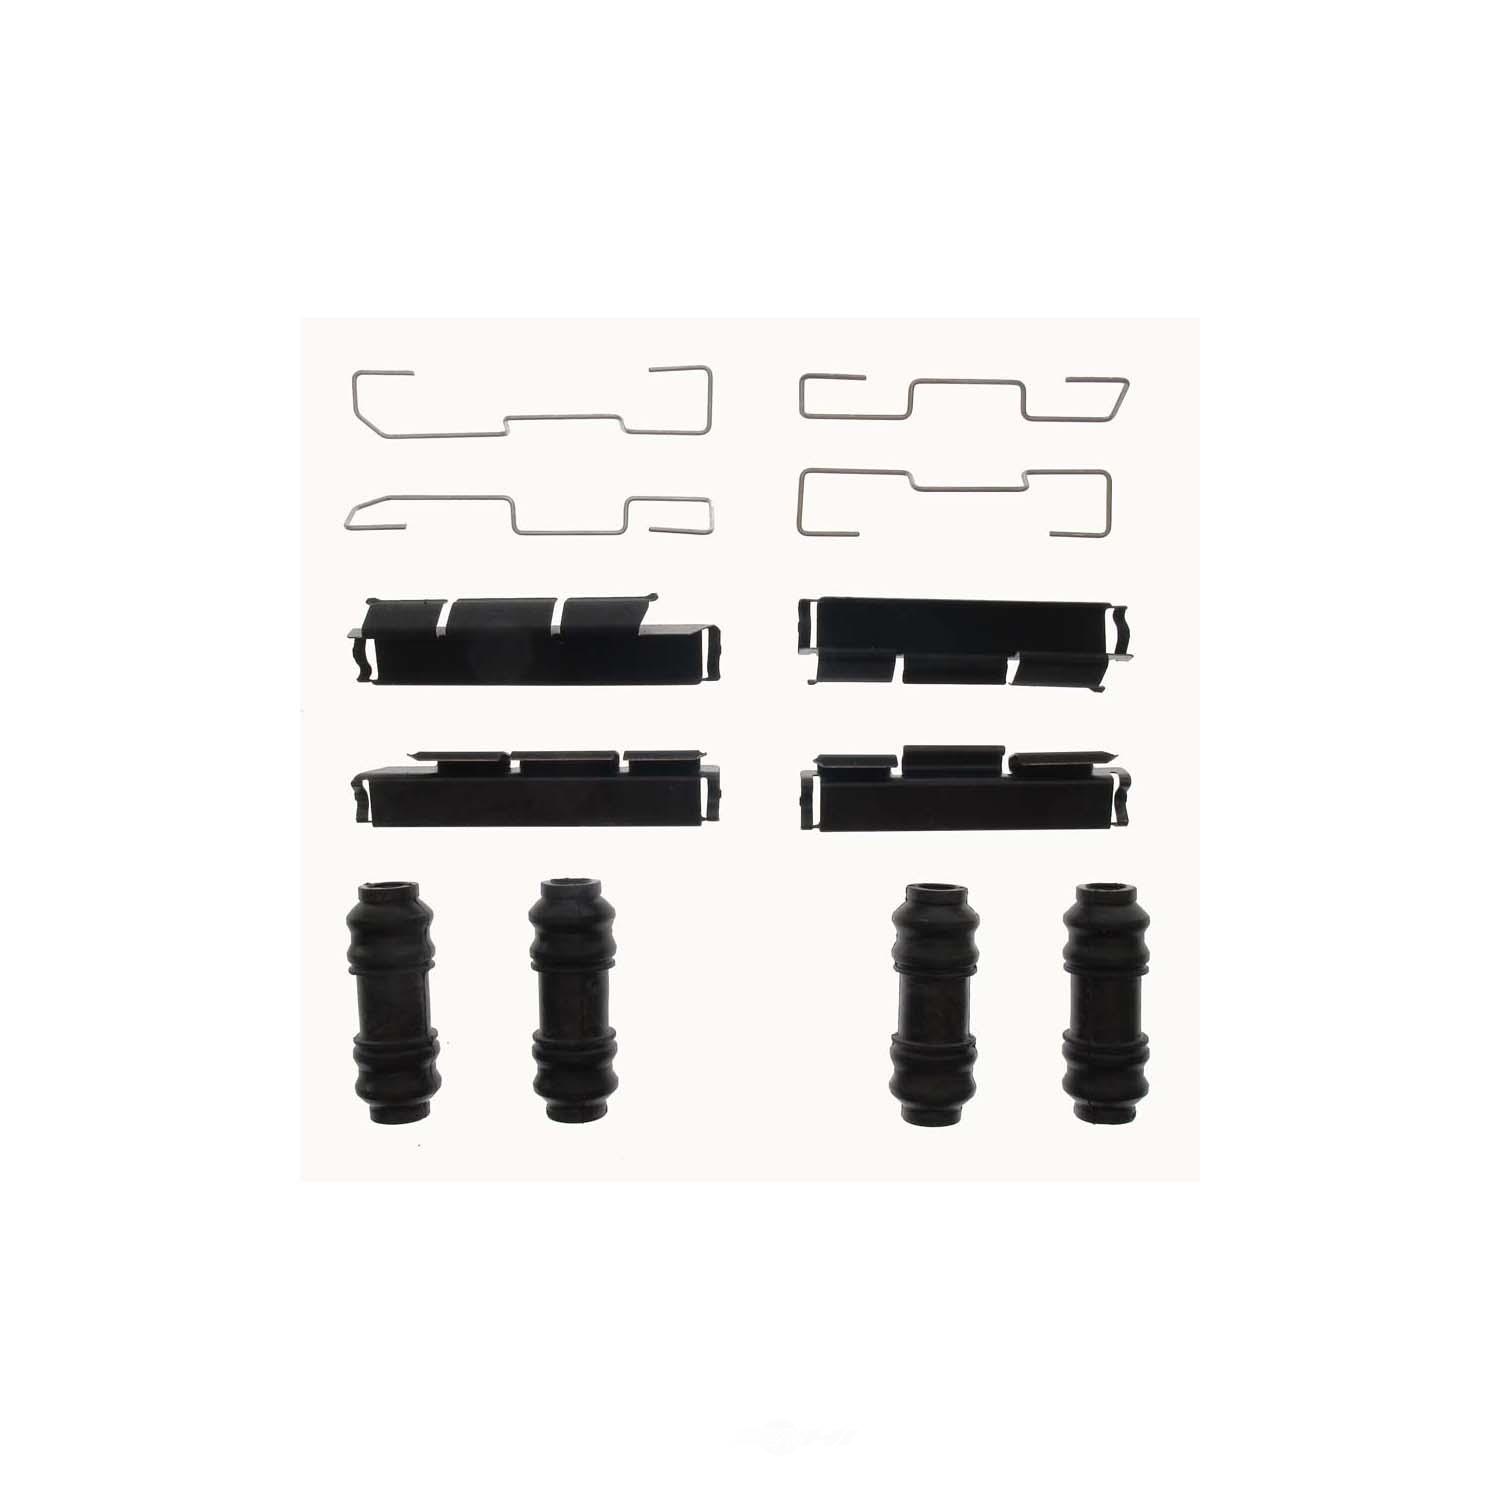 CARLSON QUALITY BRAKE PARTS - Includes Clips, Bushings & Anti-Rattle Clips - CRL H5704Q